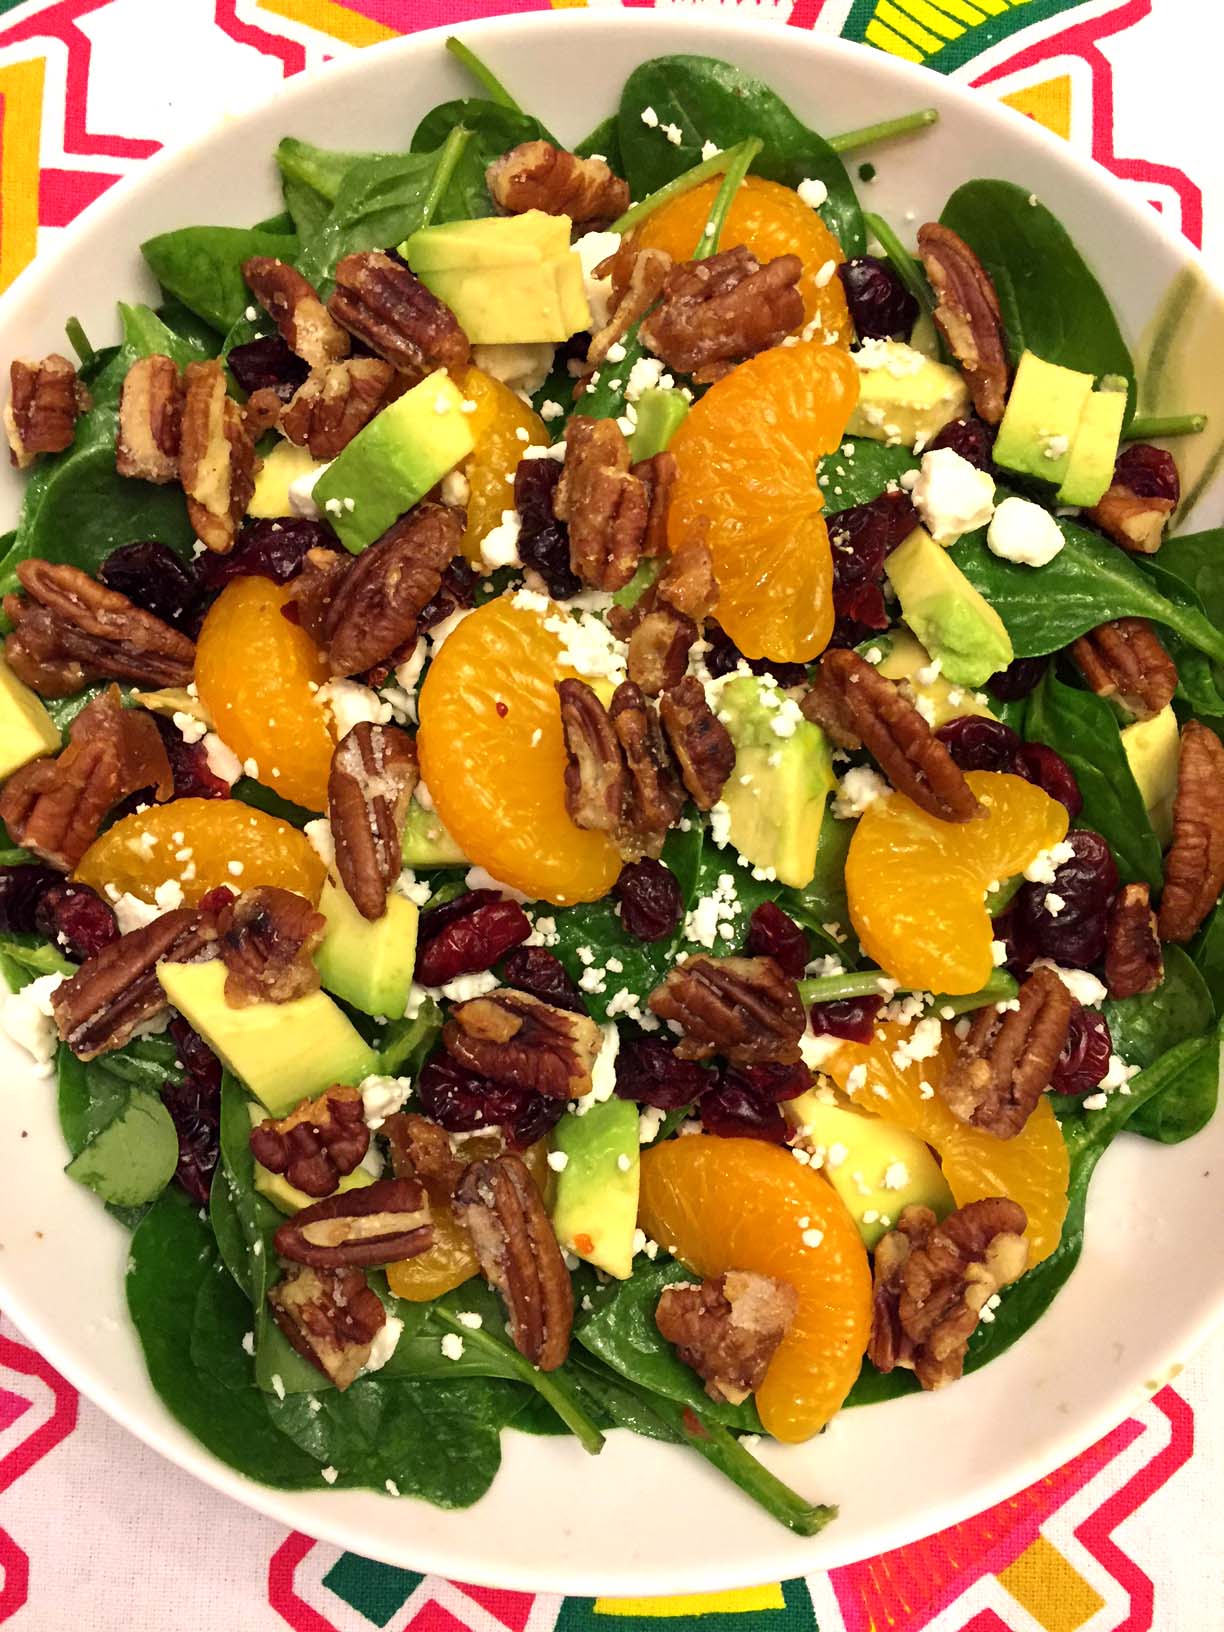 Spinach Salad With Candied Pecans, Dried Cranberries, Avocado, Feta and ...